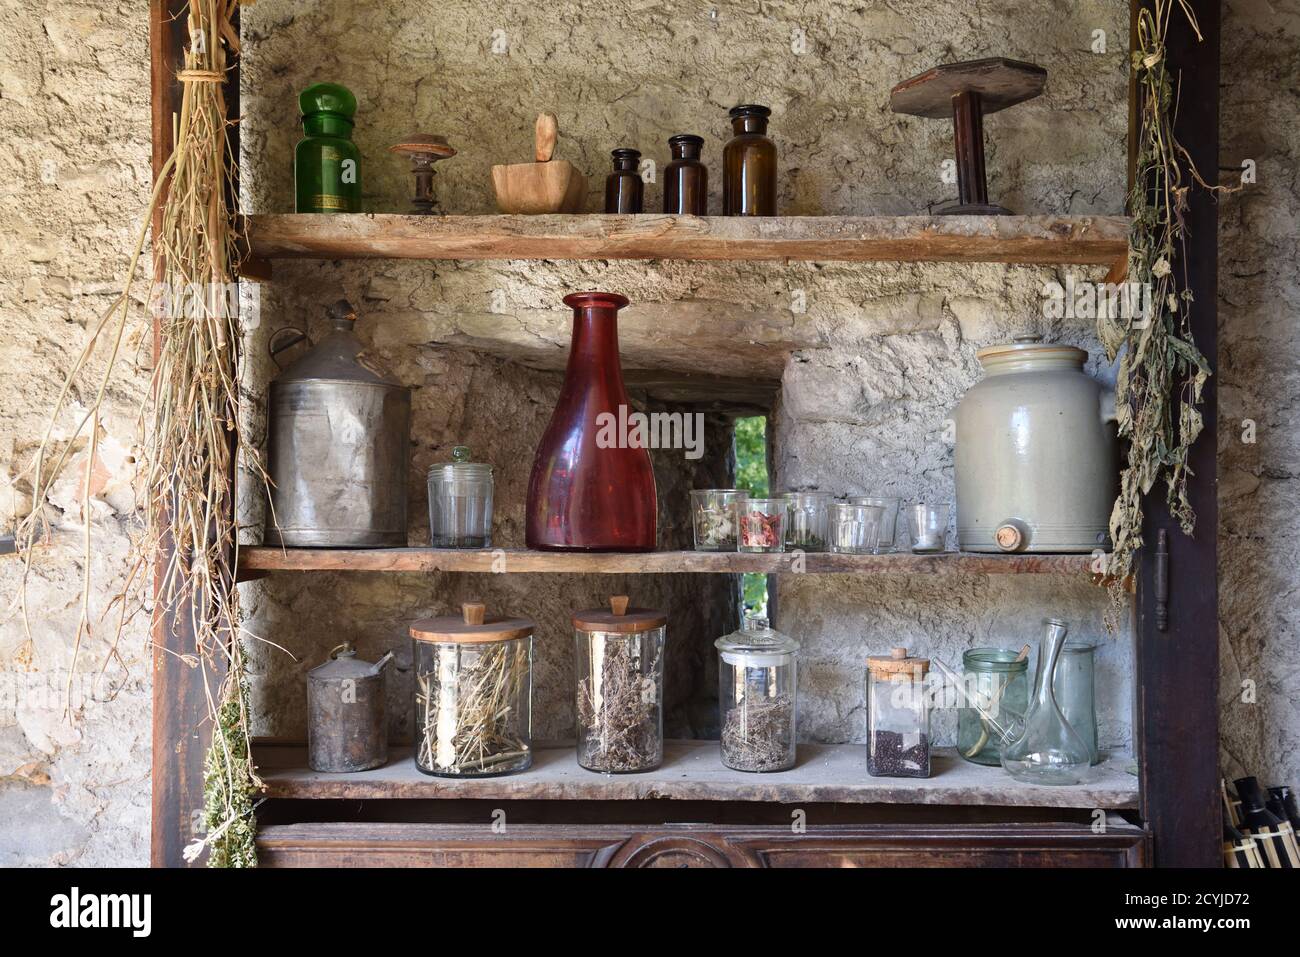 Display of Vintage Glassware and Old Bottles on Old Rustic Wooden Shelves in Colmars or Colmars-les-Alpes Museum France Stock Photo